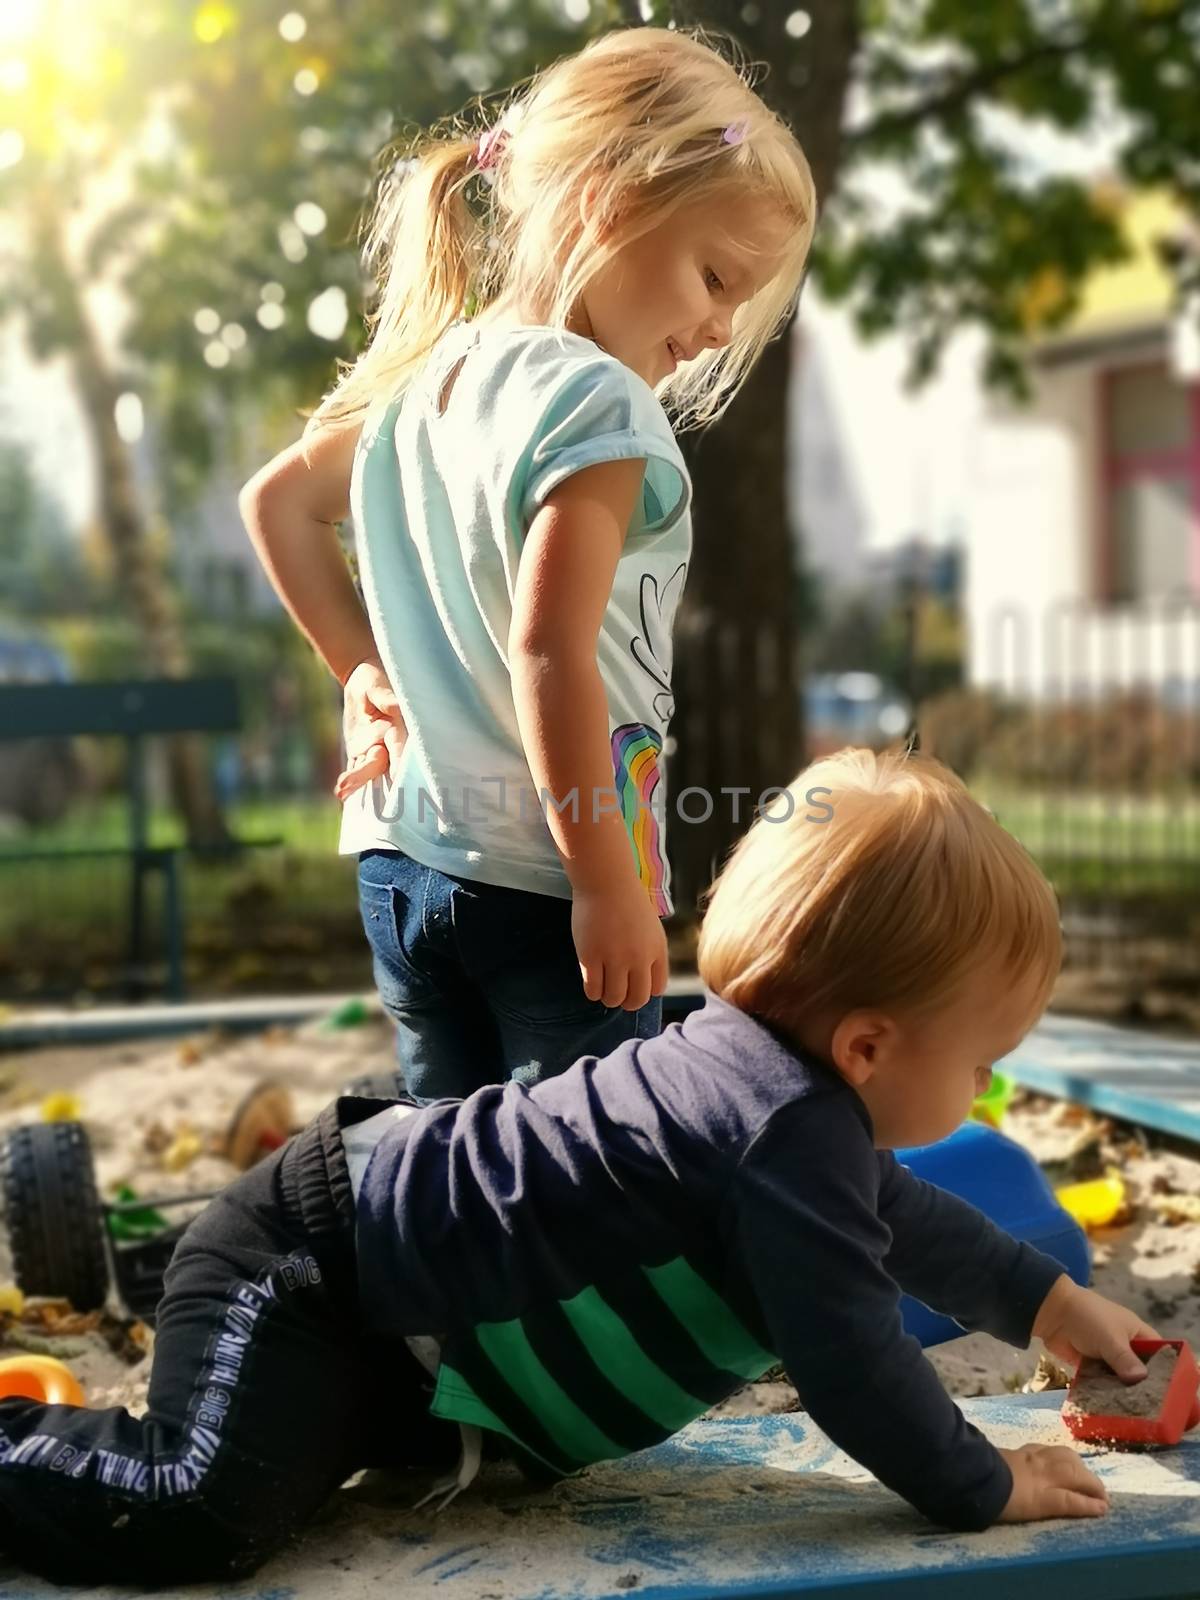 Sister and brother playing with sand. Adorable little kids famil by wektorygrafika